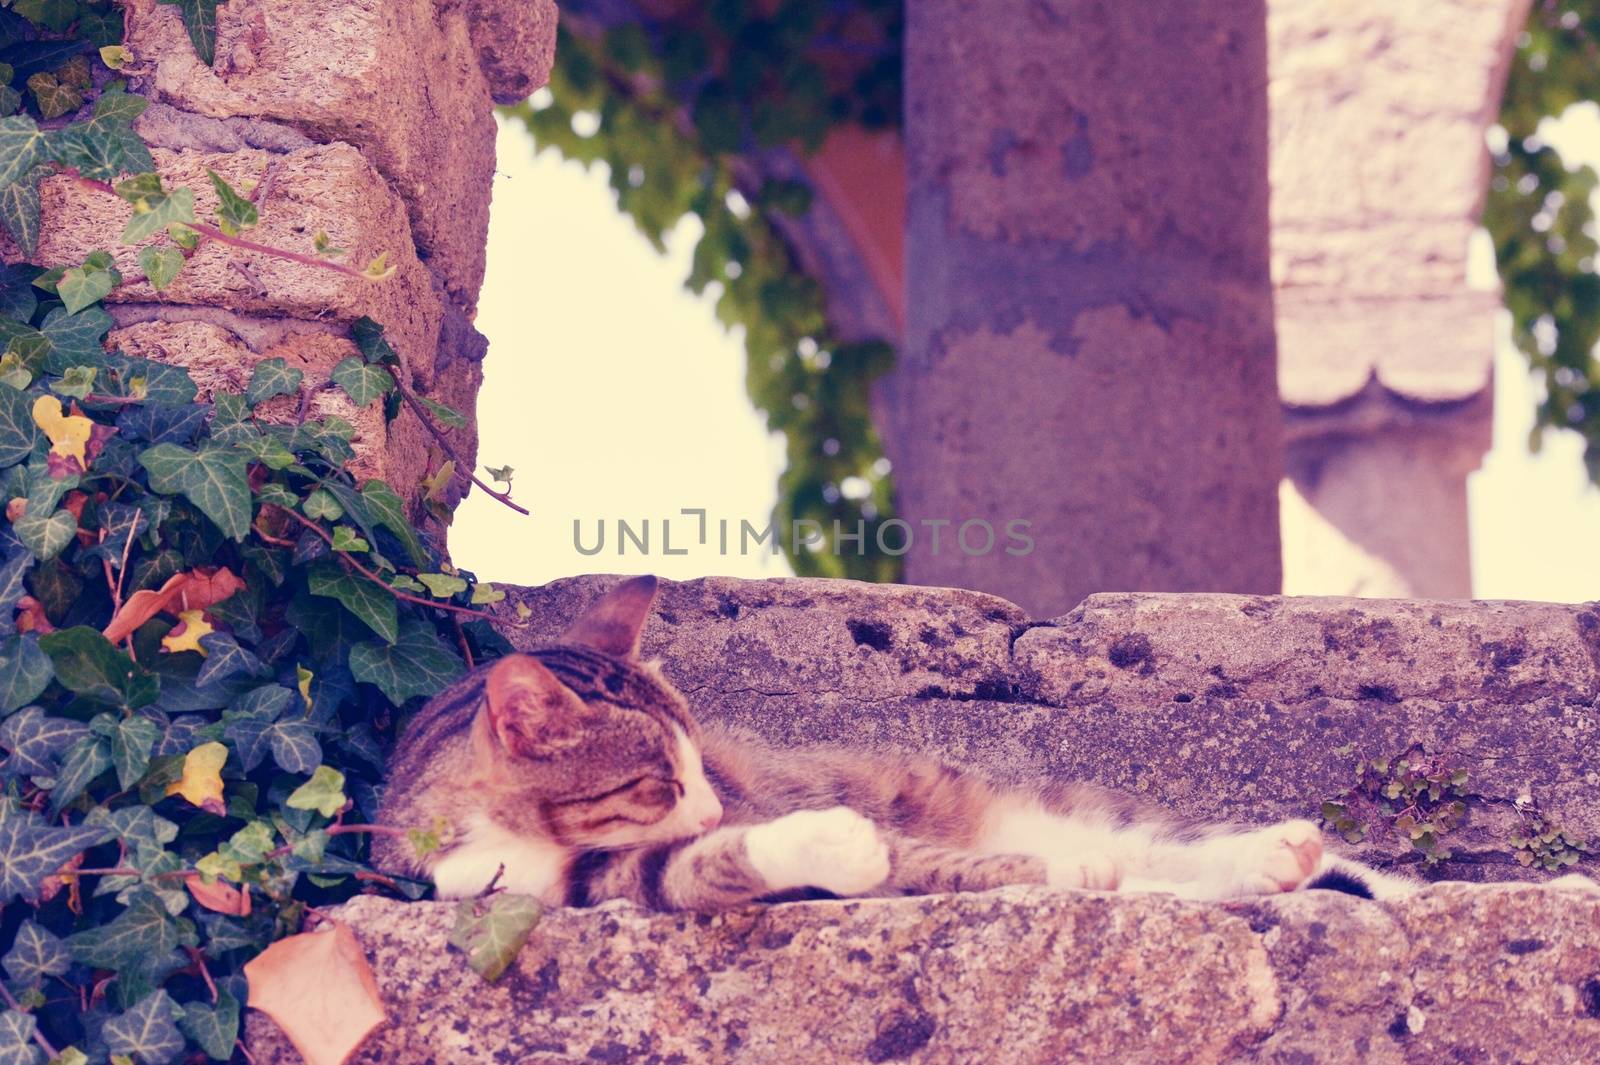 Cat sleeping on the steps of stone stairs